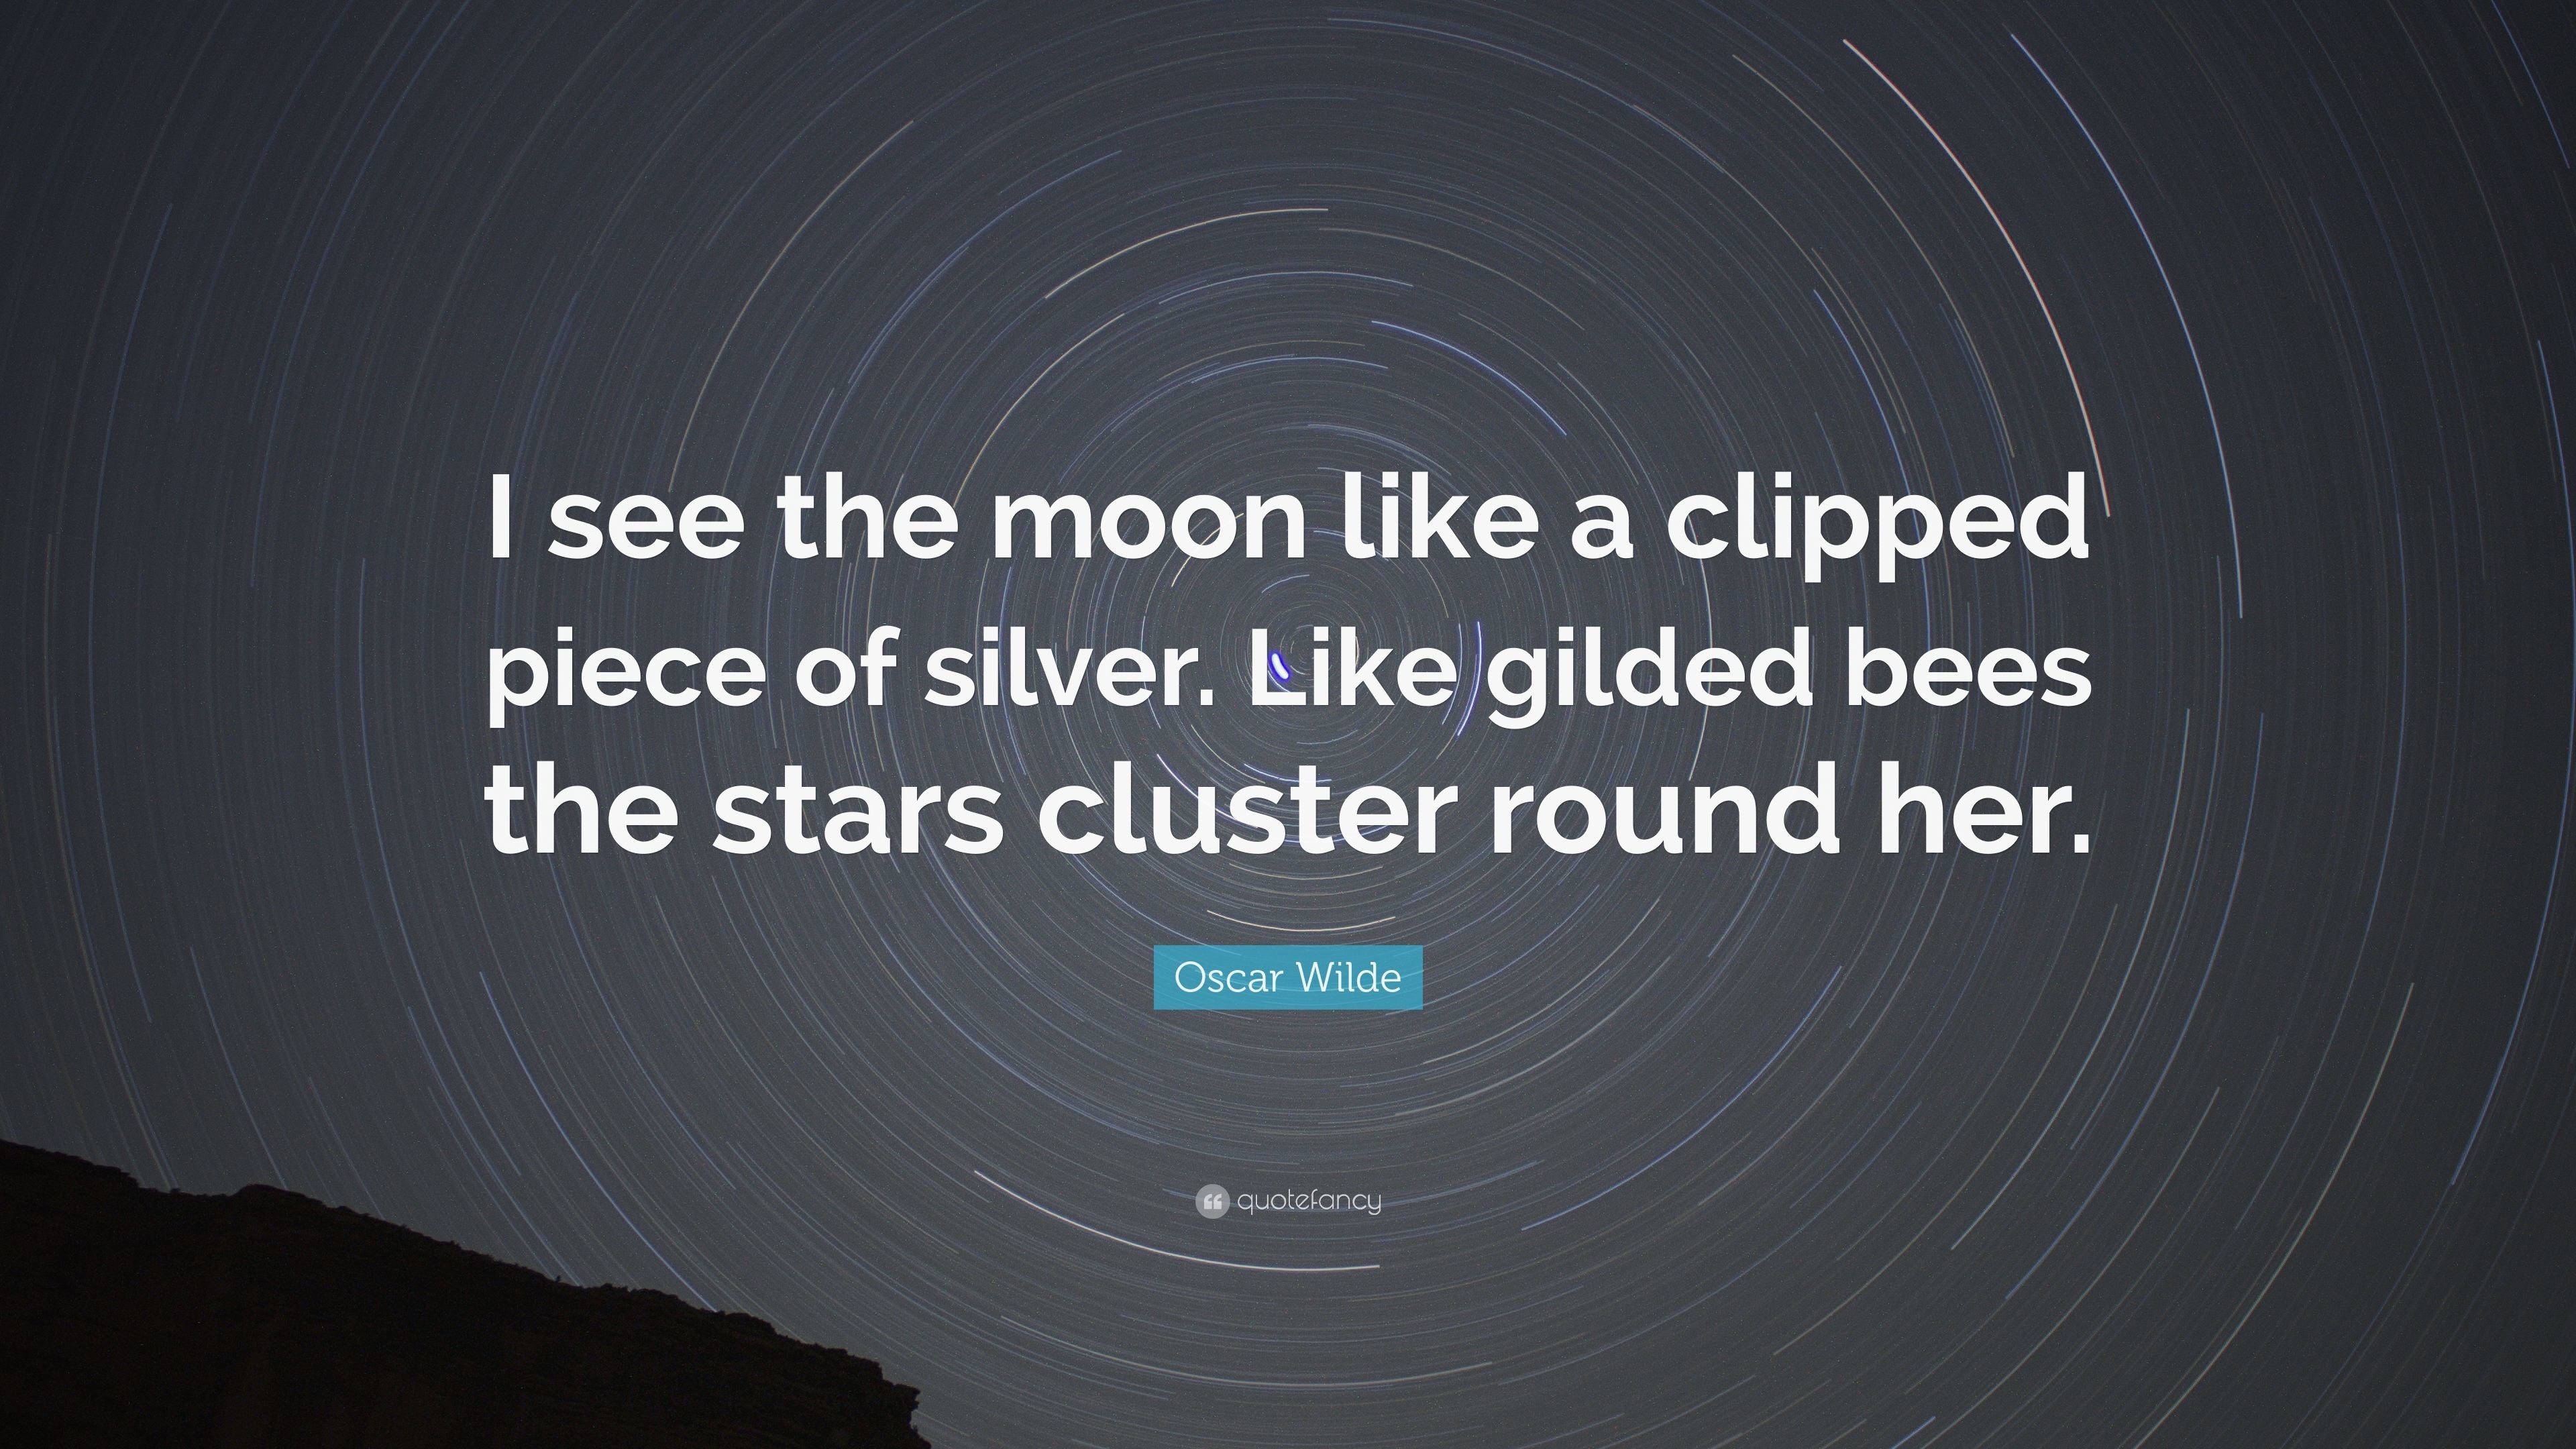 3840x2160 Oscar Wilde Quote: “I see the moon like a clipped piece of silver.